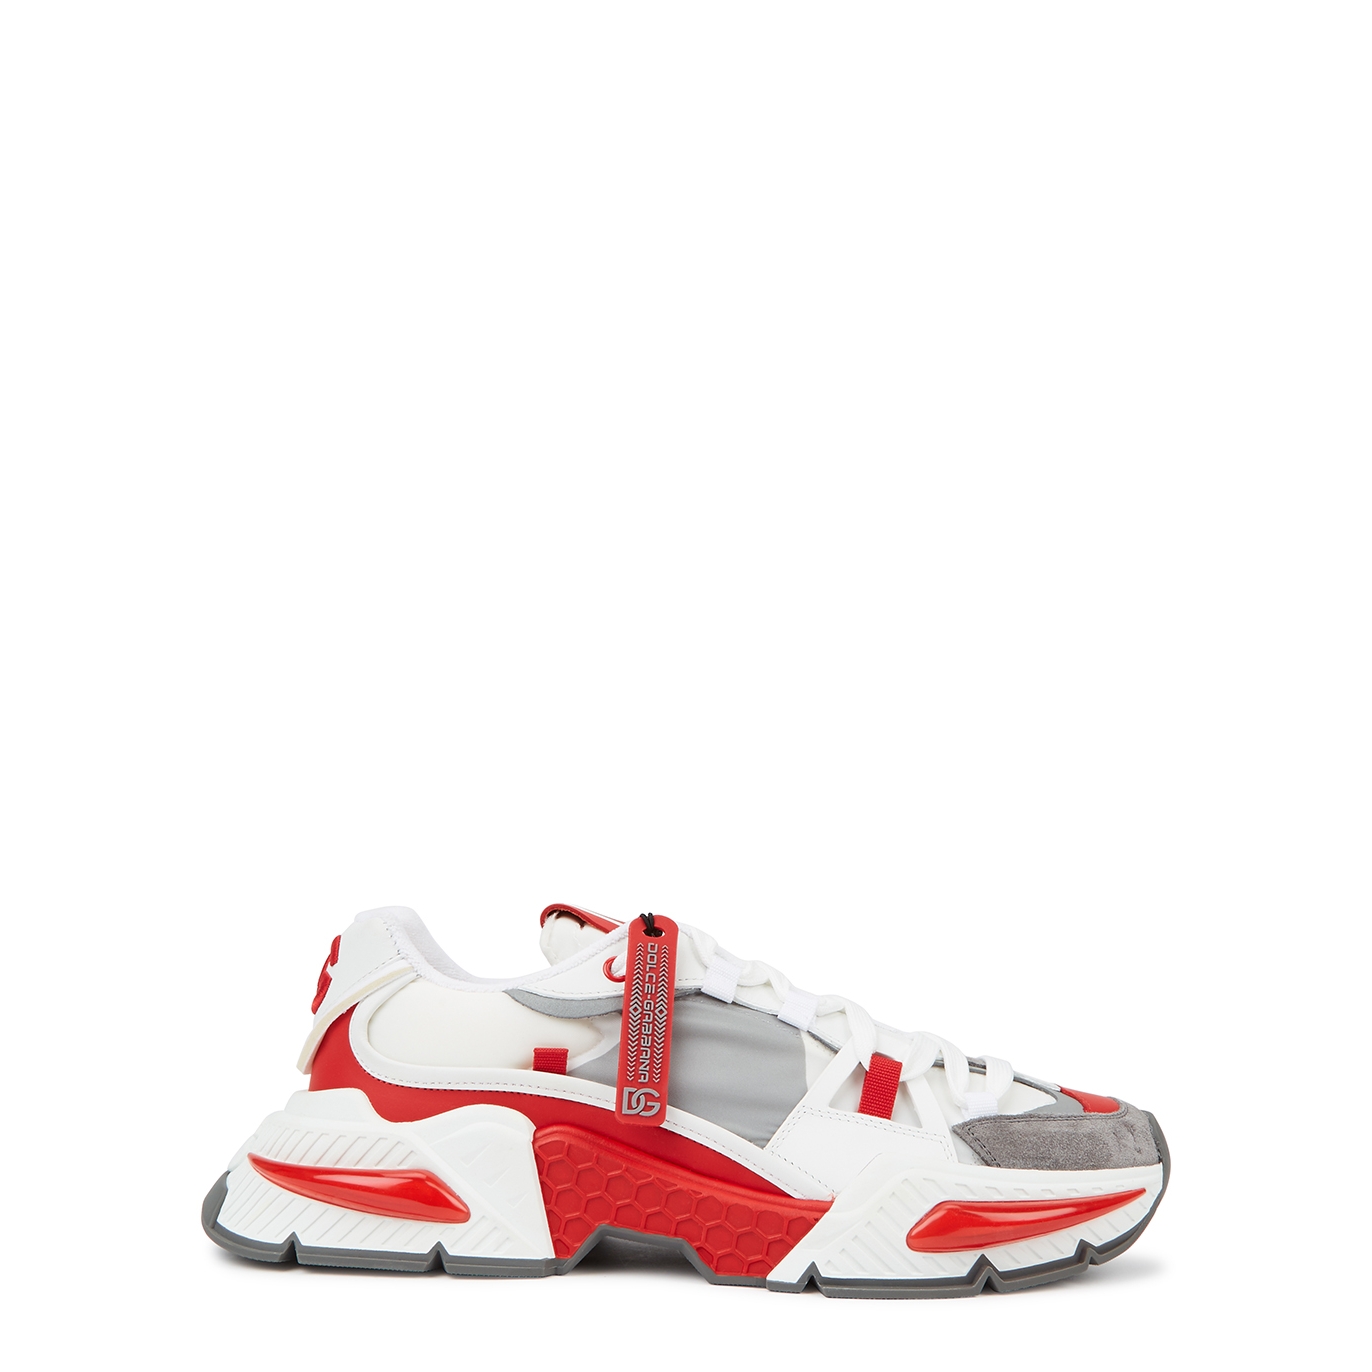 Dolce & Gabbana Air Master Red And White Panelled Sneakers - 7